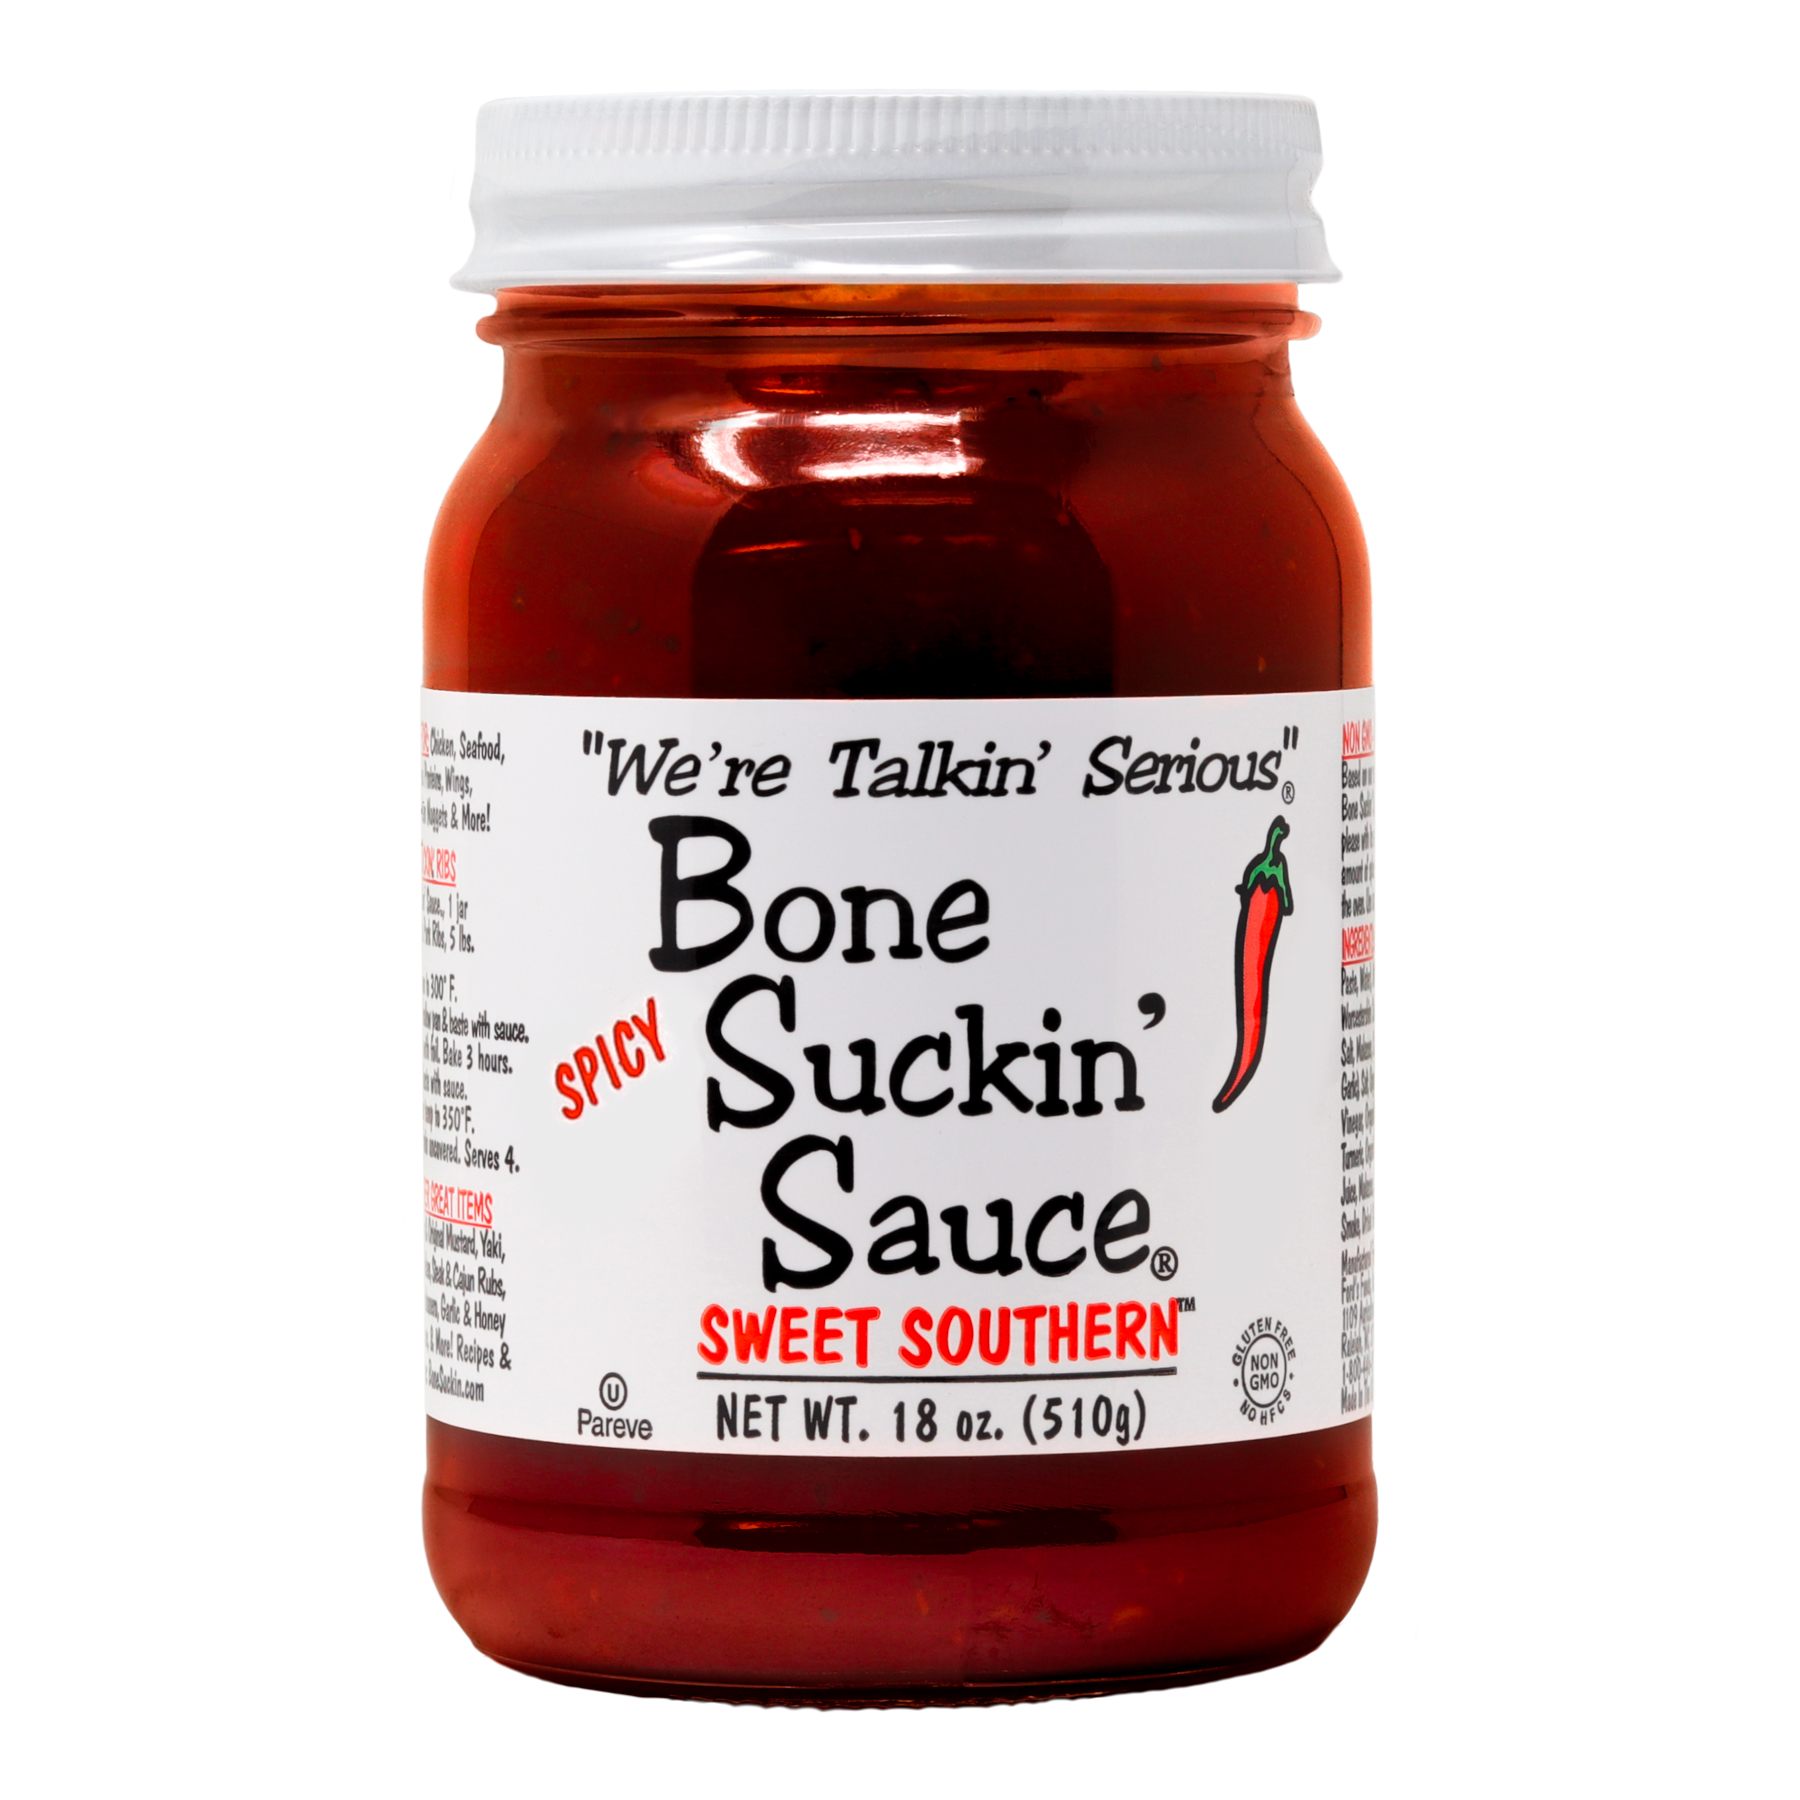 Spicy Sweet Southern Bone Suckin' Sauce, 18 oz. Glass Bottle Bone Suckin' Sauce Sweet Southern Spicy BBQ Sauce - 18 oz in Glass Bottle, For Ribs, Chicken, Pork, Beef - Gluten-Free, Non-GMO, Kosher, Spicy Barbecue Sauce Sweetened with Cane Sugar & Molasses, 1 Pc